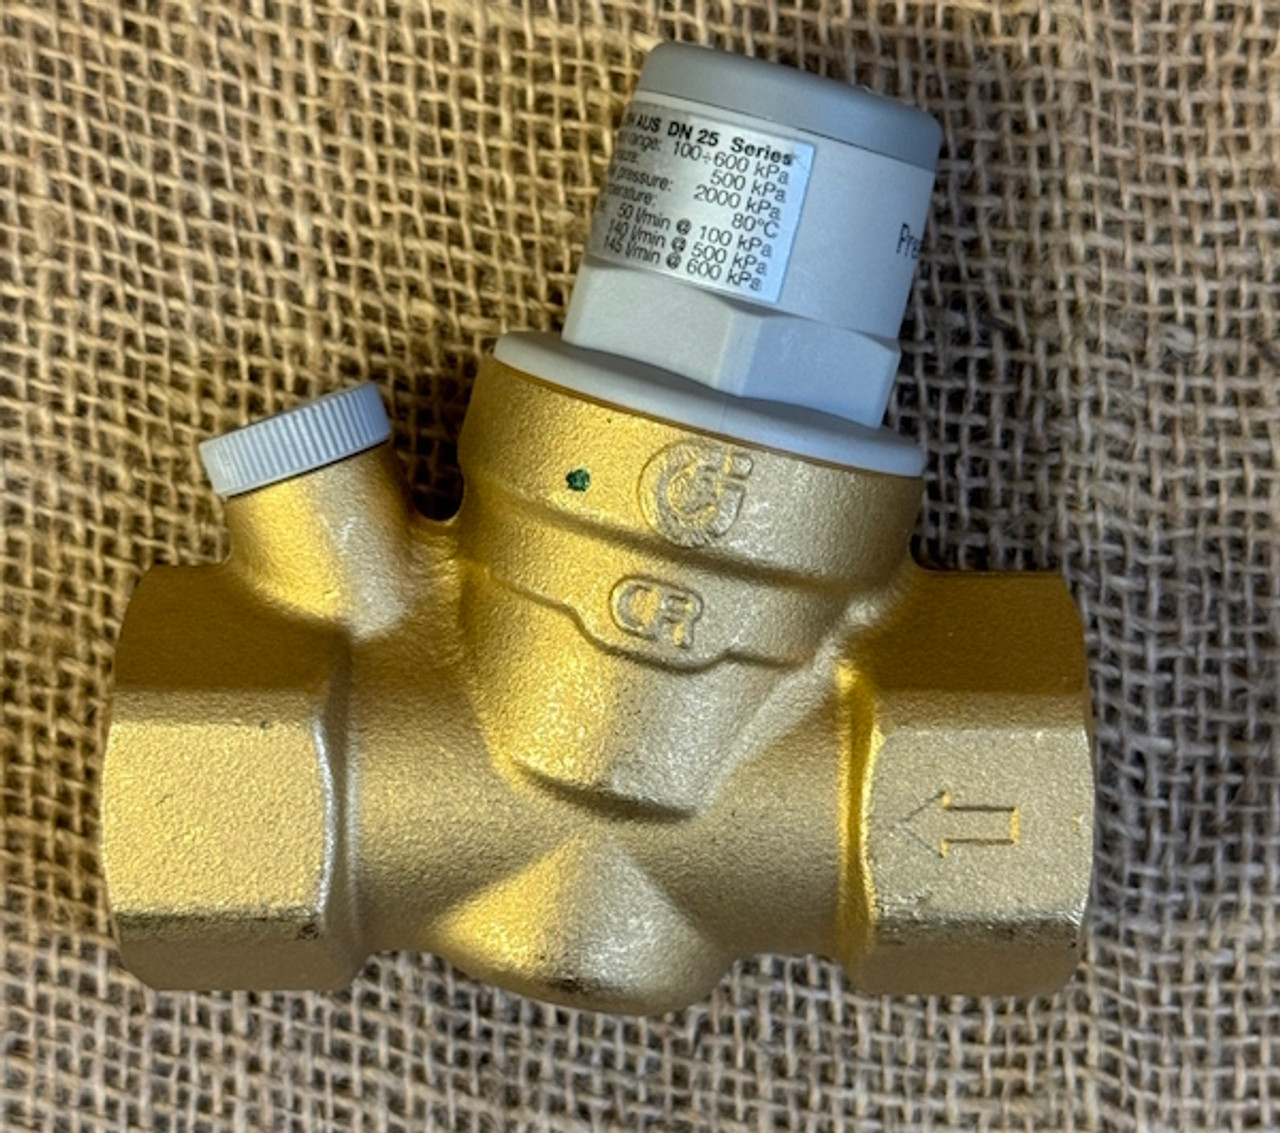 Direct Acting PRV - 15mm Static Flow Reducer "Watermark Approved"